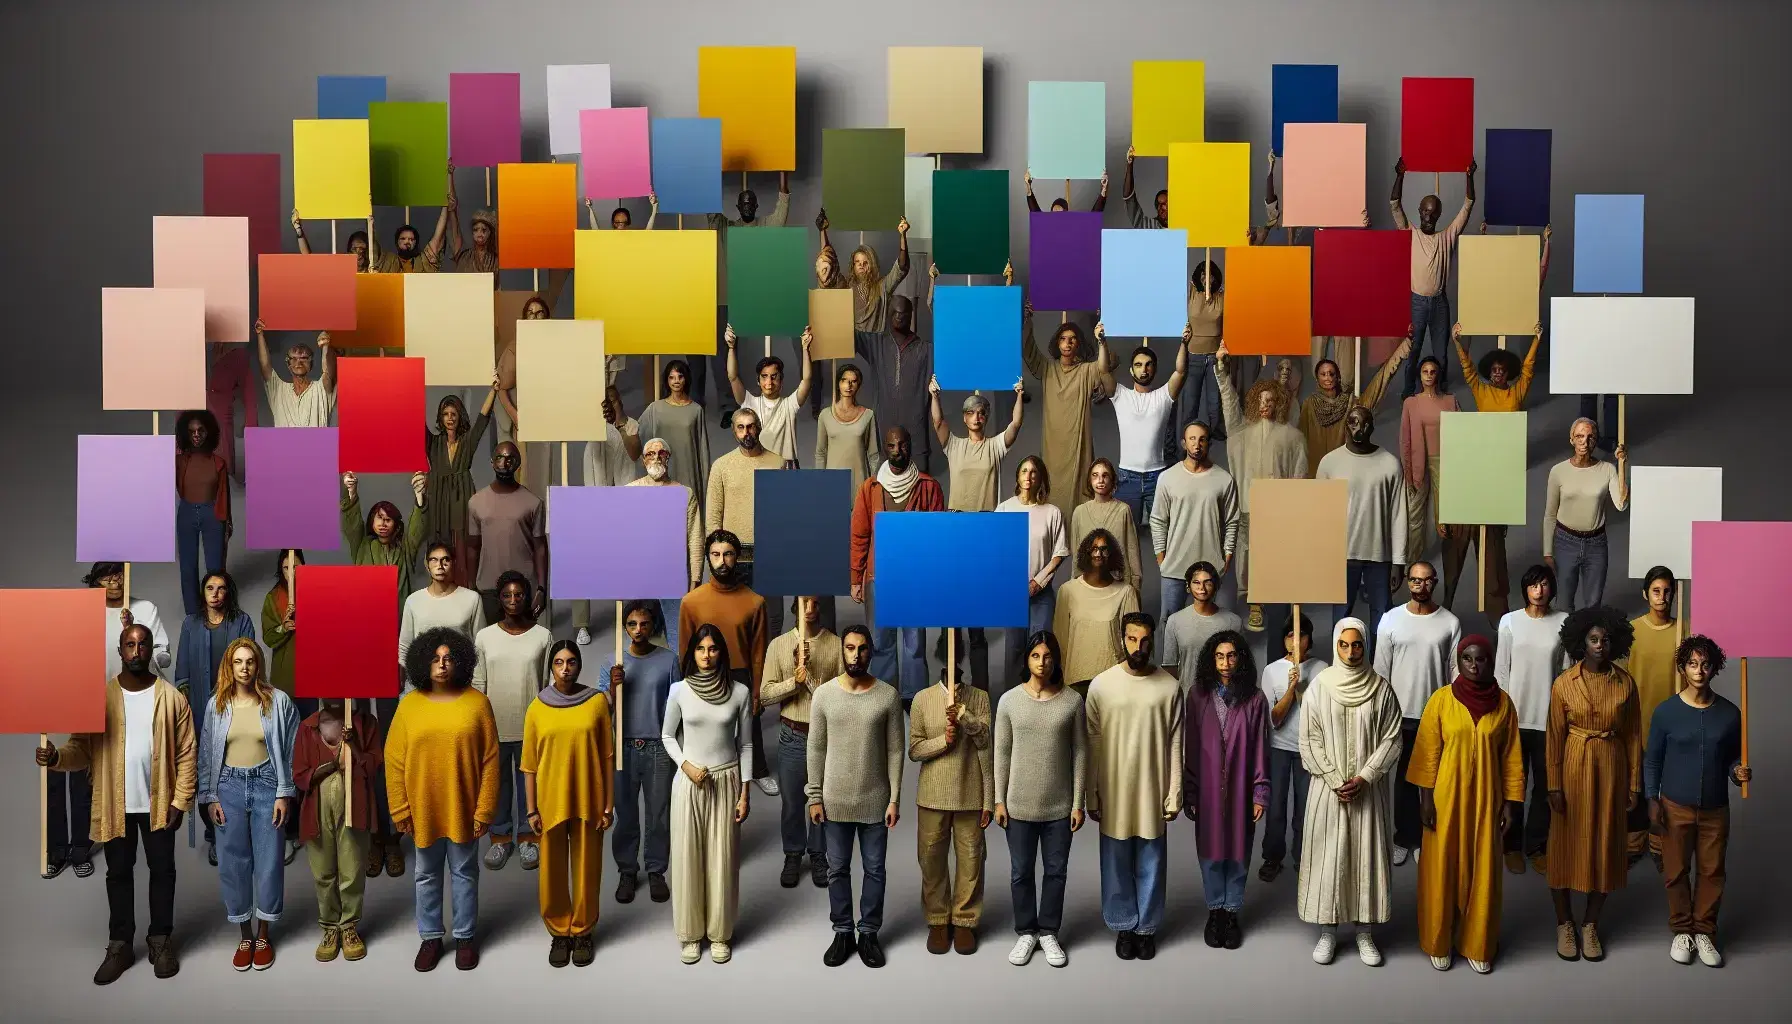 Diverse group holding blank colored placards in a rainbow sequence, representing inclusivity and unity, against a light gray background.